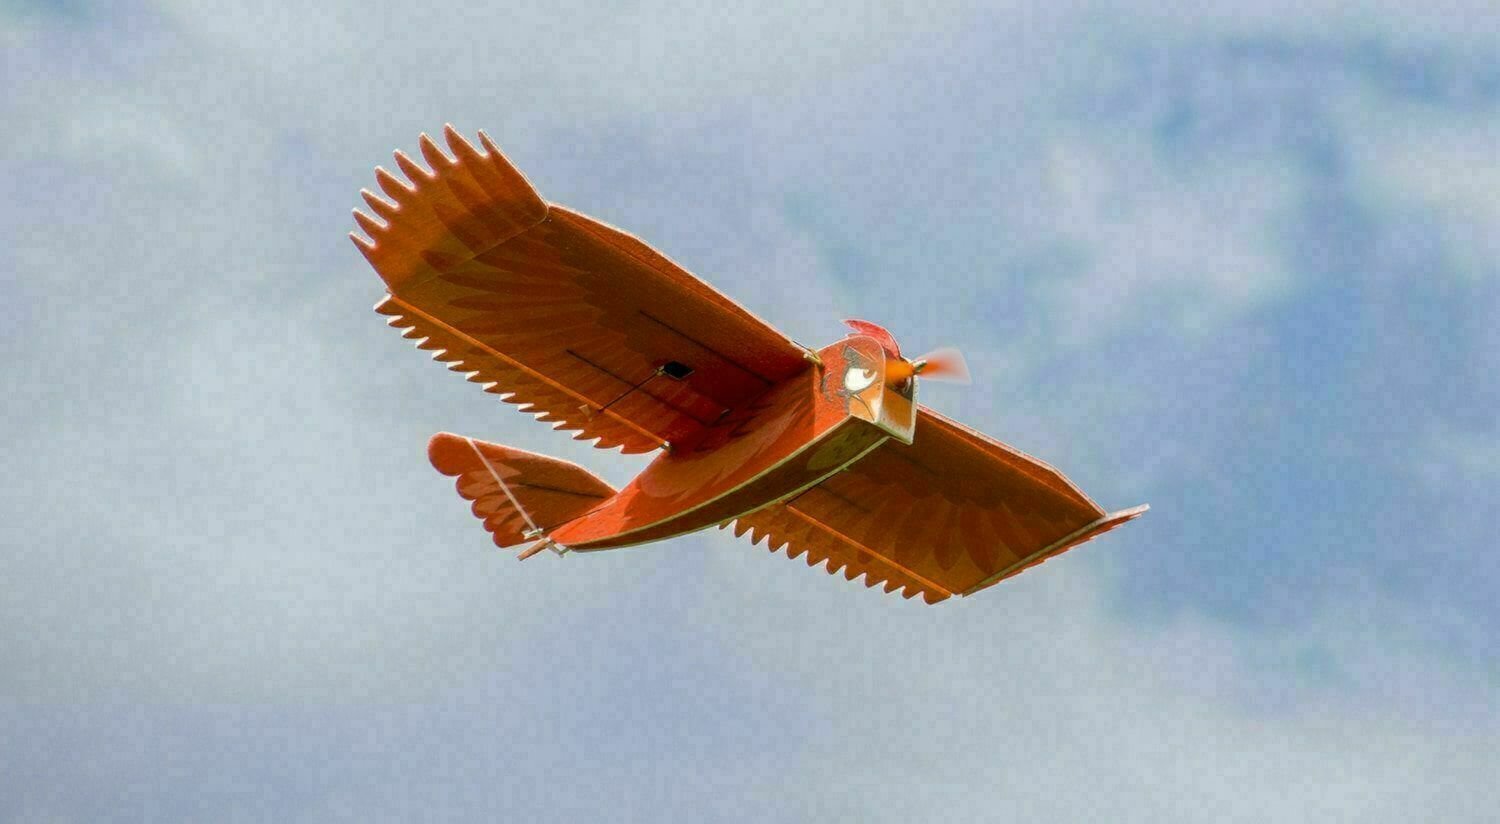 New Biomimetic Northern Cardinal EPP Foam Slow Flyer 1170mm wingspan RC Airplanes Plane Toy Model